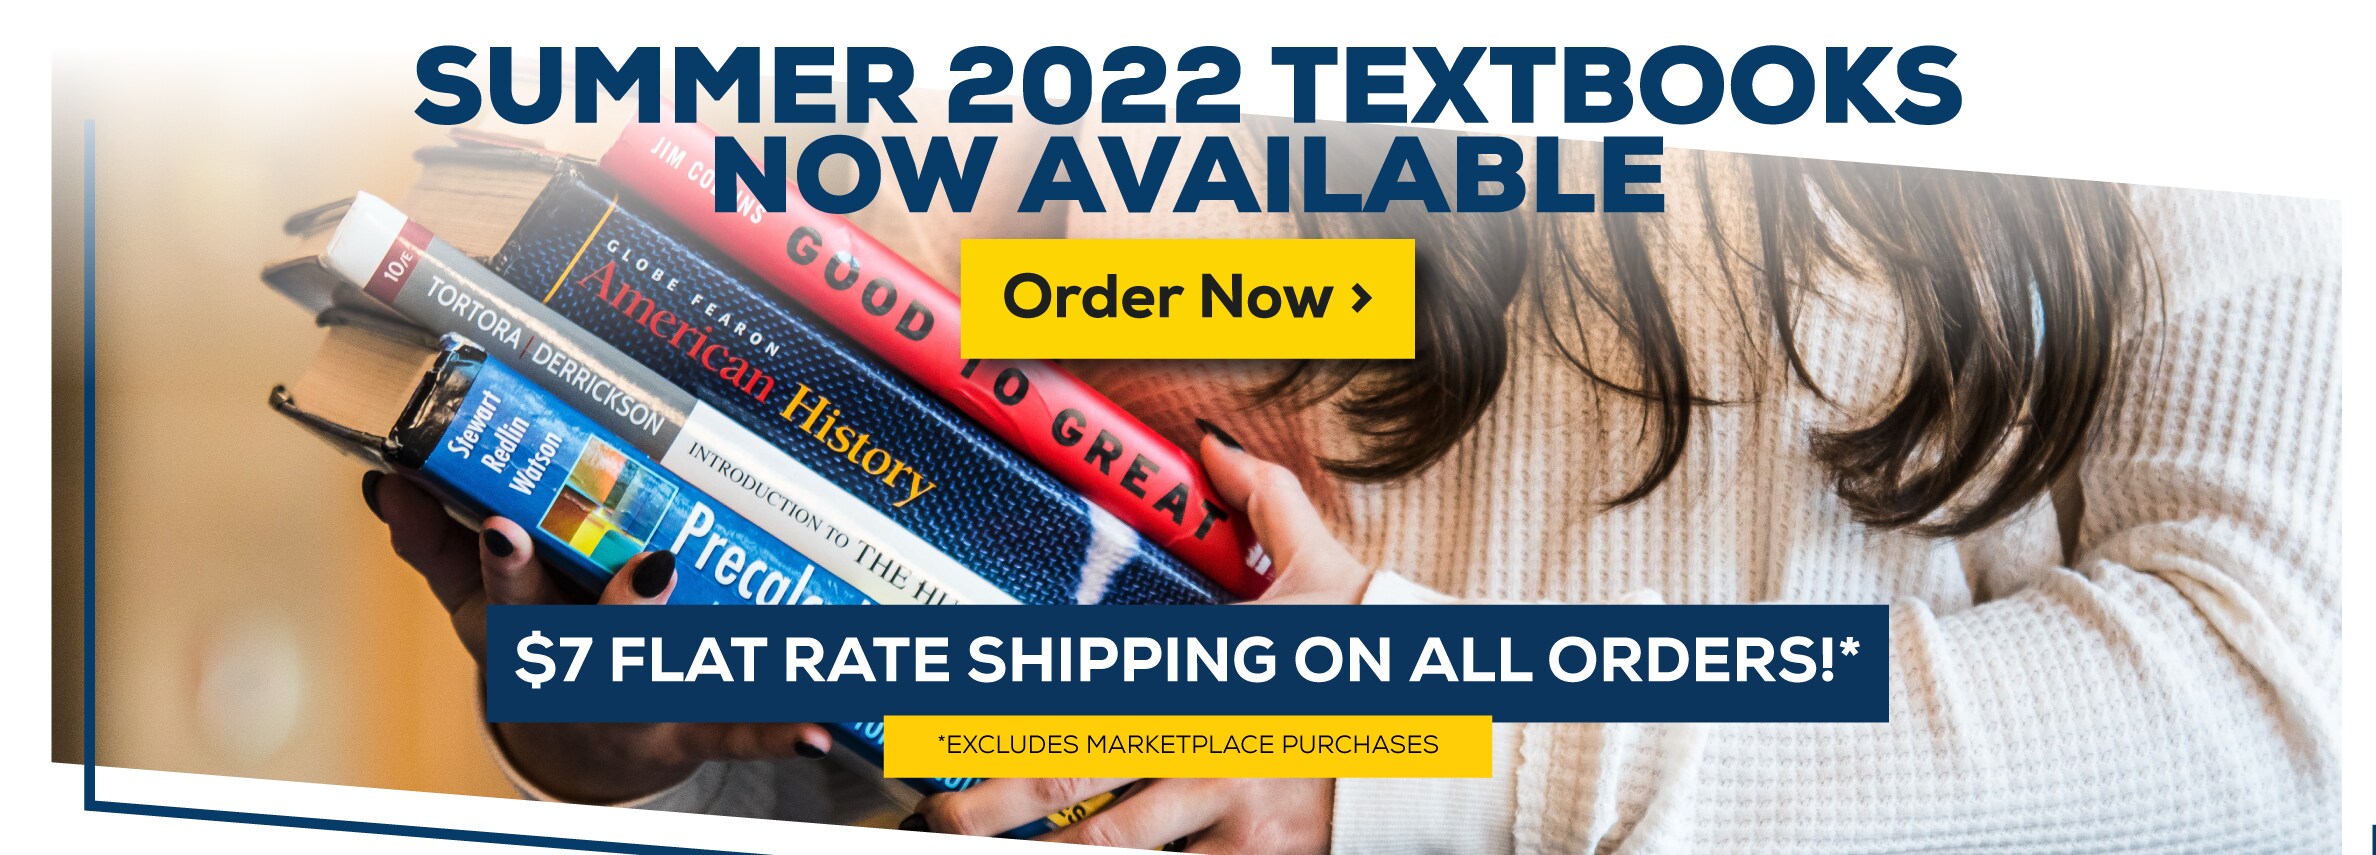 Summer 2022 Textbooks now available. order now. $7 Flat rate shipping on all orders!* Excludes Marketplace Purchases (new tab)